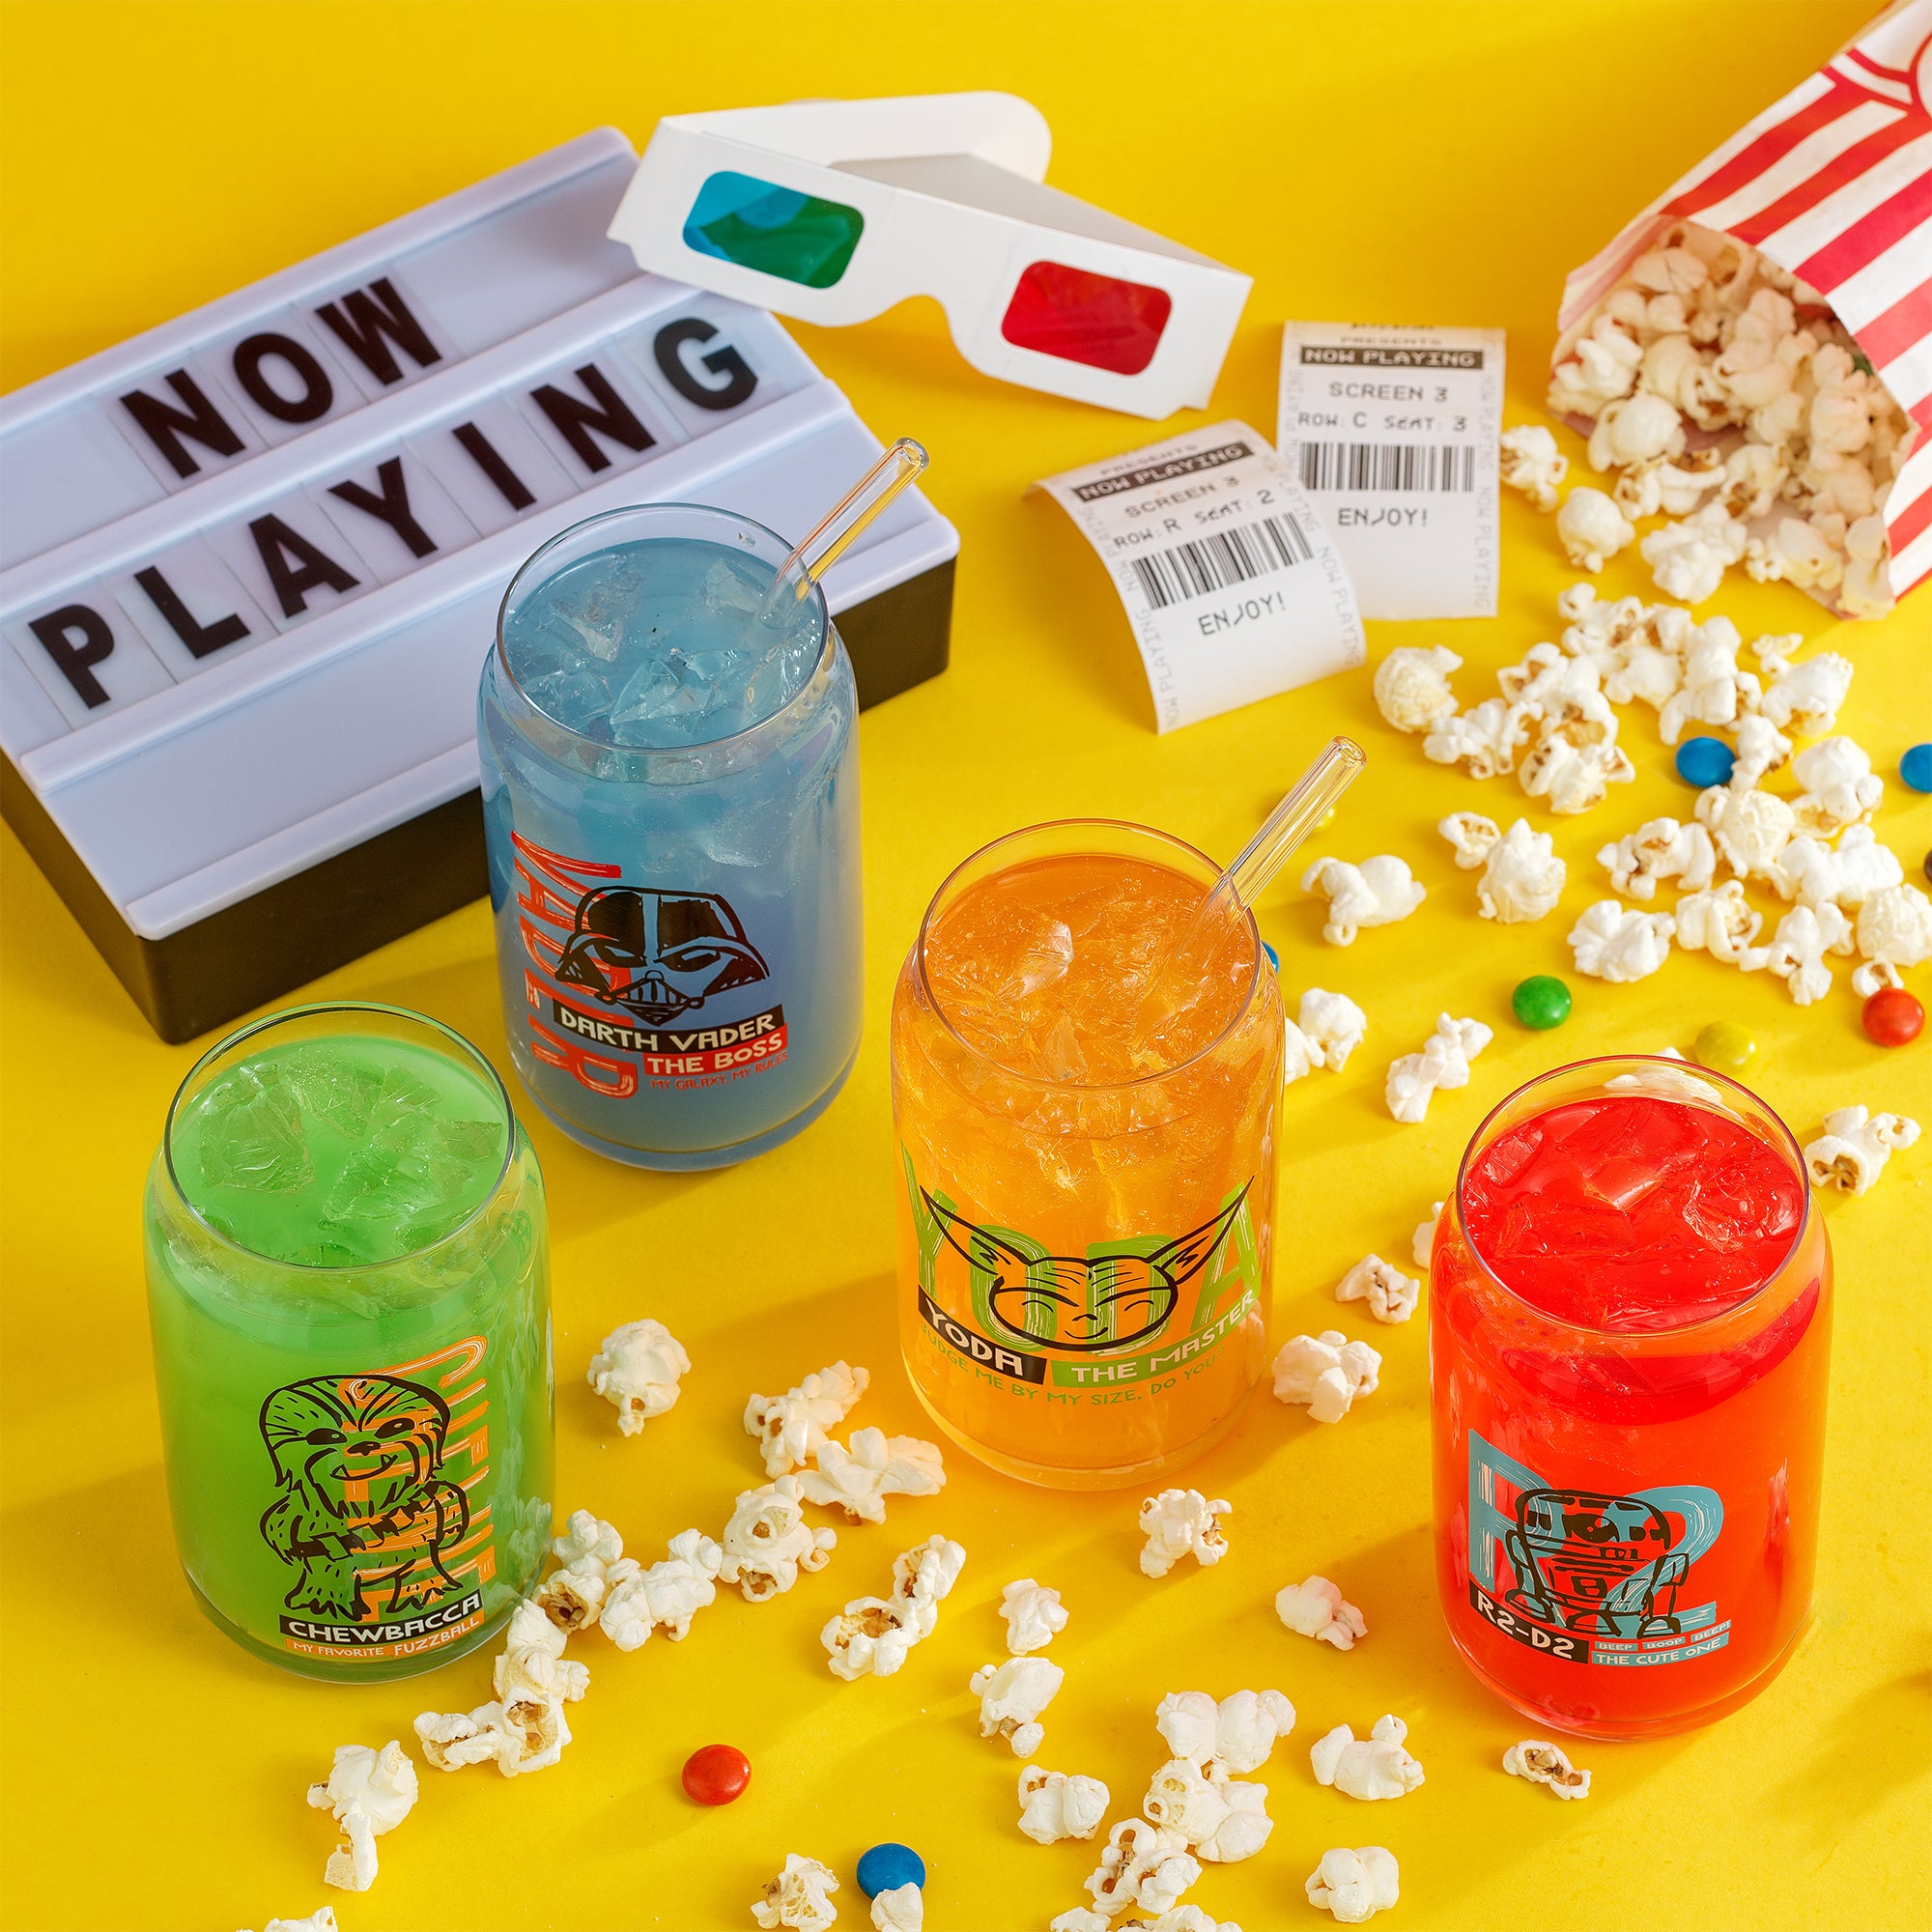 JoyJolt's Star Wars 'Now Playing' glass tumbler set featuring Yoda, Chewbacca, Darth Vader, R2-D2. They are all surrounded by popcorn, candied chocolate, ticket stubs, and 3D glasses. A 'Now Playing' movie sign is placed alongside it. 